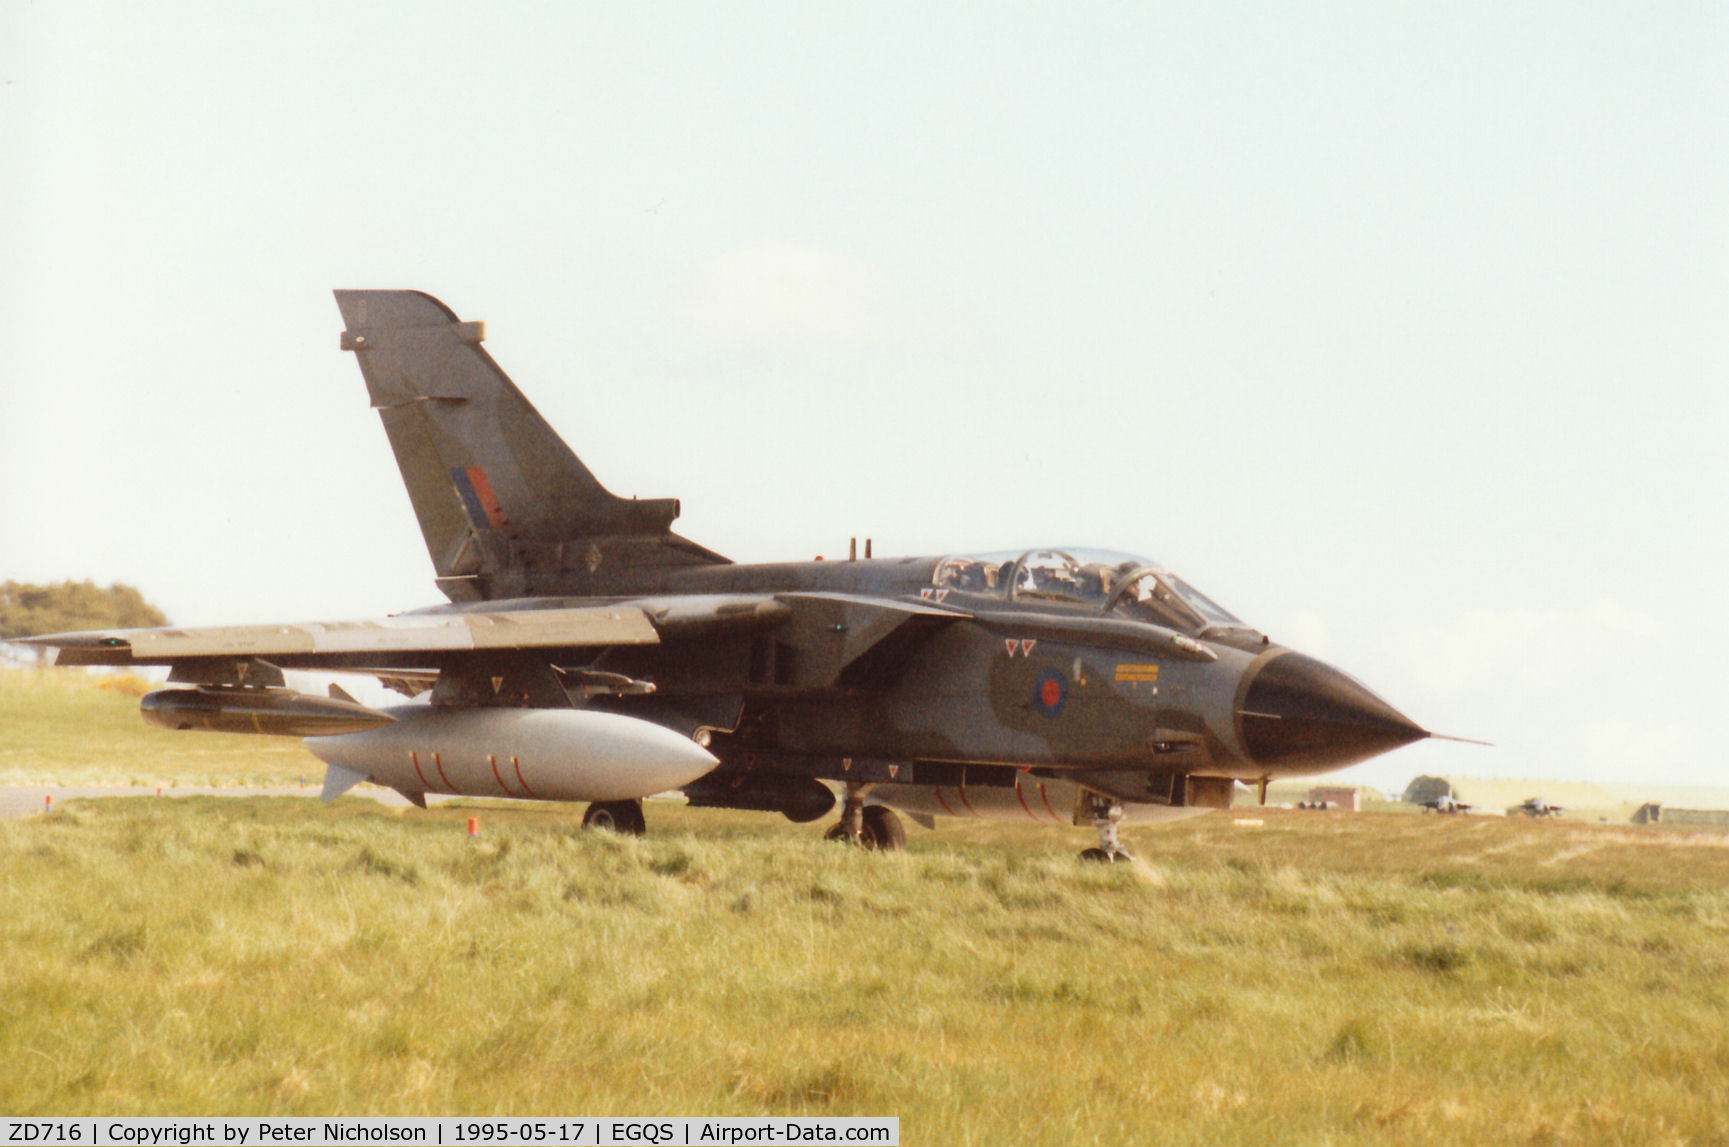 ZD716, 1984 Panavia Tornado GR.1 C/N 341/BS117/3157, Tornado GR.1 of the Strike Attack Operational Evaluation Unit at Boscombe Down taxying to Runway 05 at RAF Lossiemouth in the Summer of 1995.